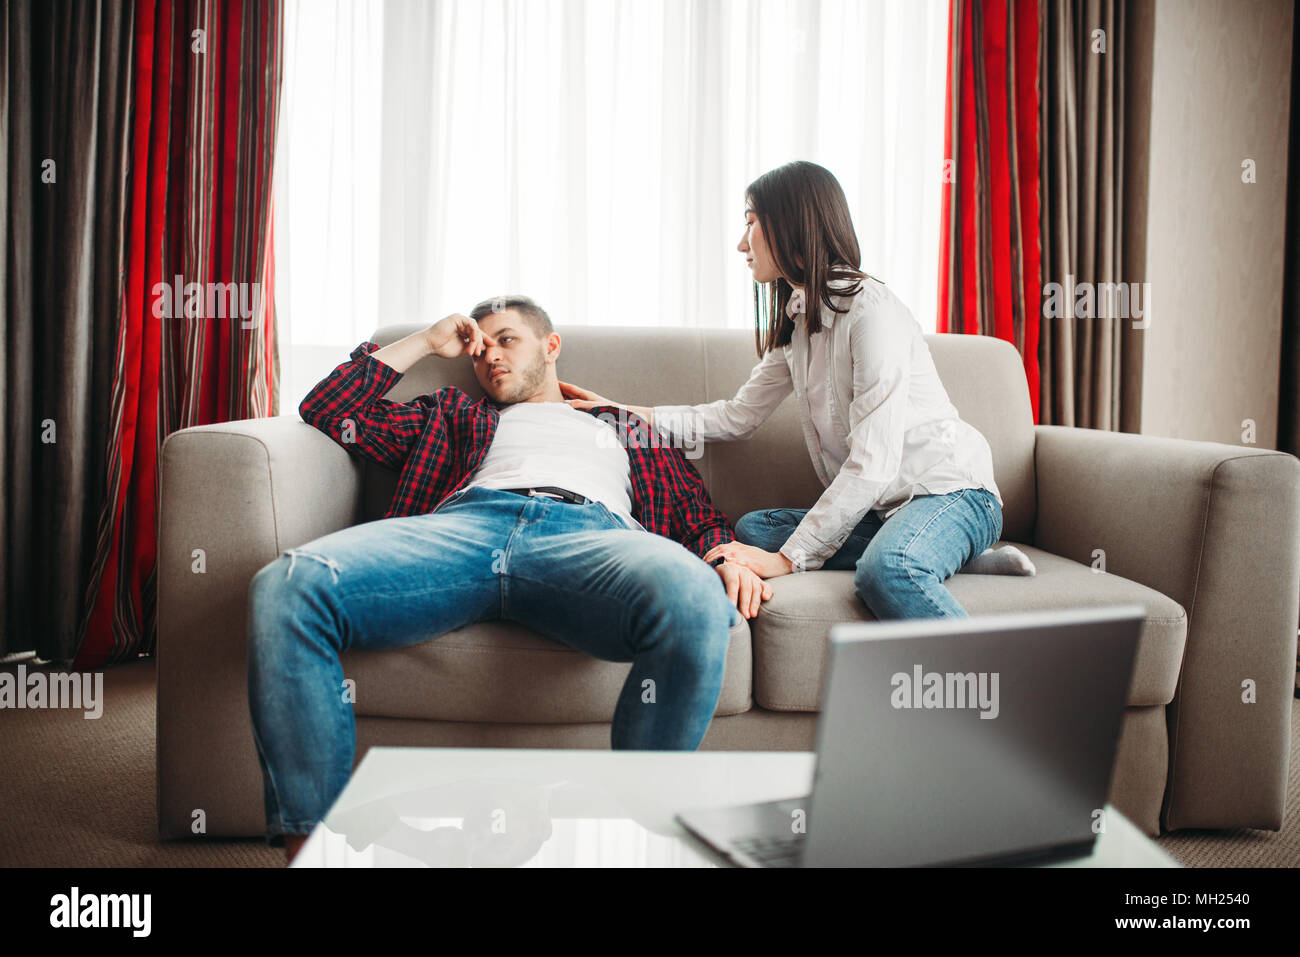 Wife reassures her husband after family quarrel Stock Photo